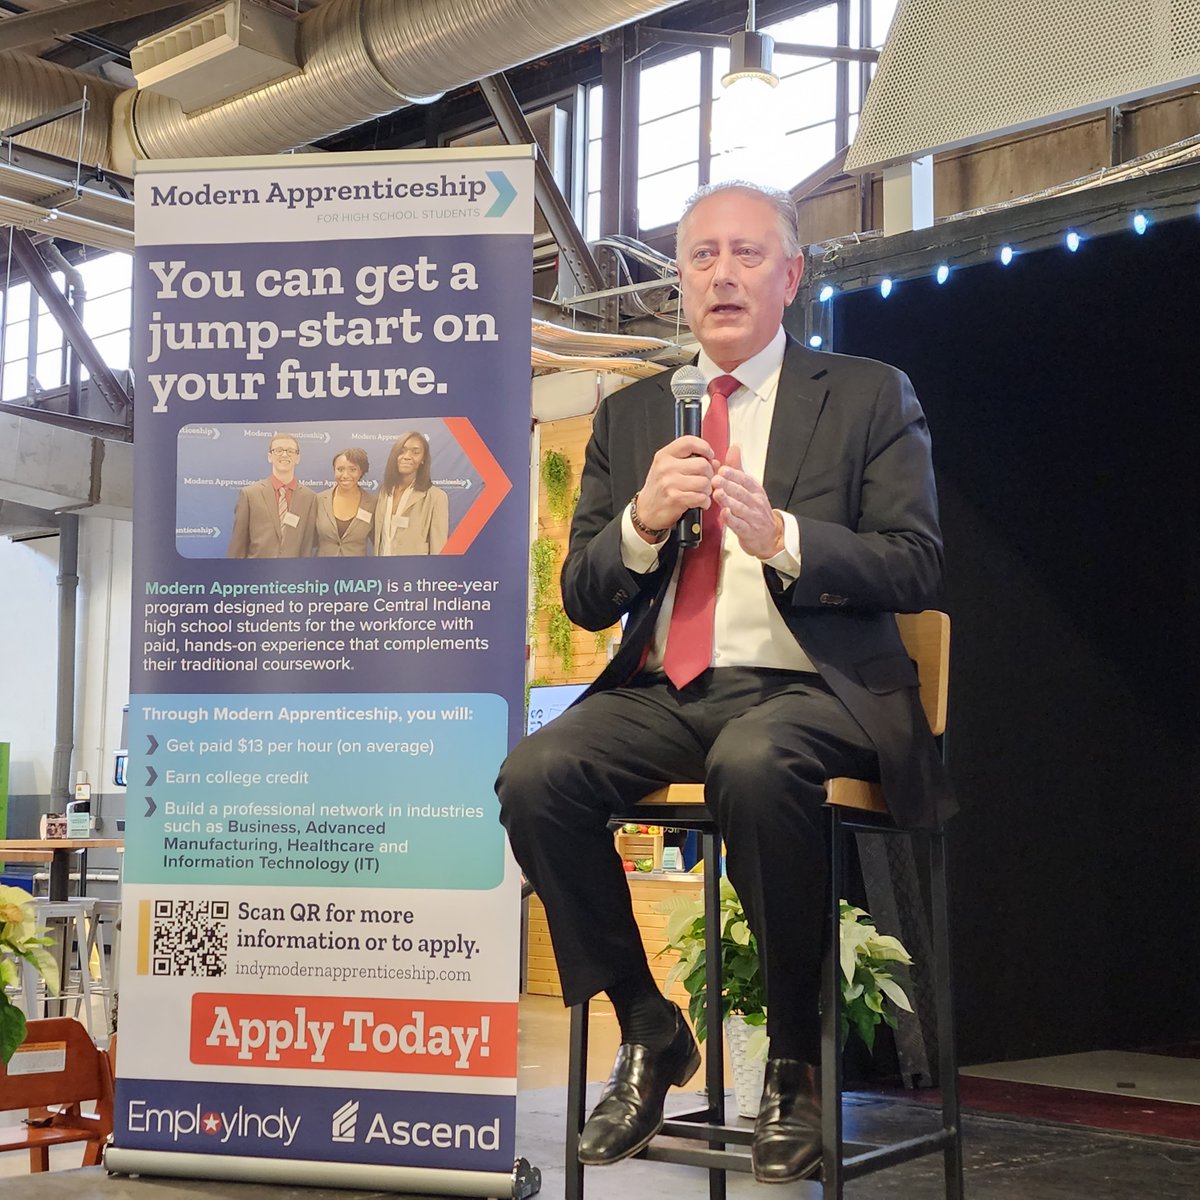 These apprenticeships are in businesses that drive our economy with high paying jobs, advanced manuf., tech, and healthcare. Noel Ginsburg CEO CareerwiseColorado. @AscendIndiana @EmployIndy #COPSummit